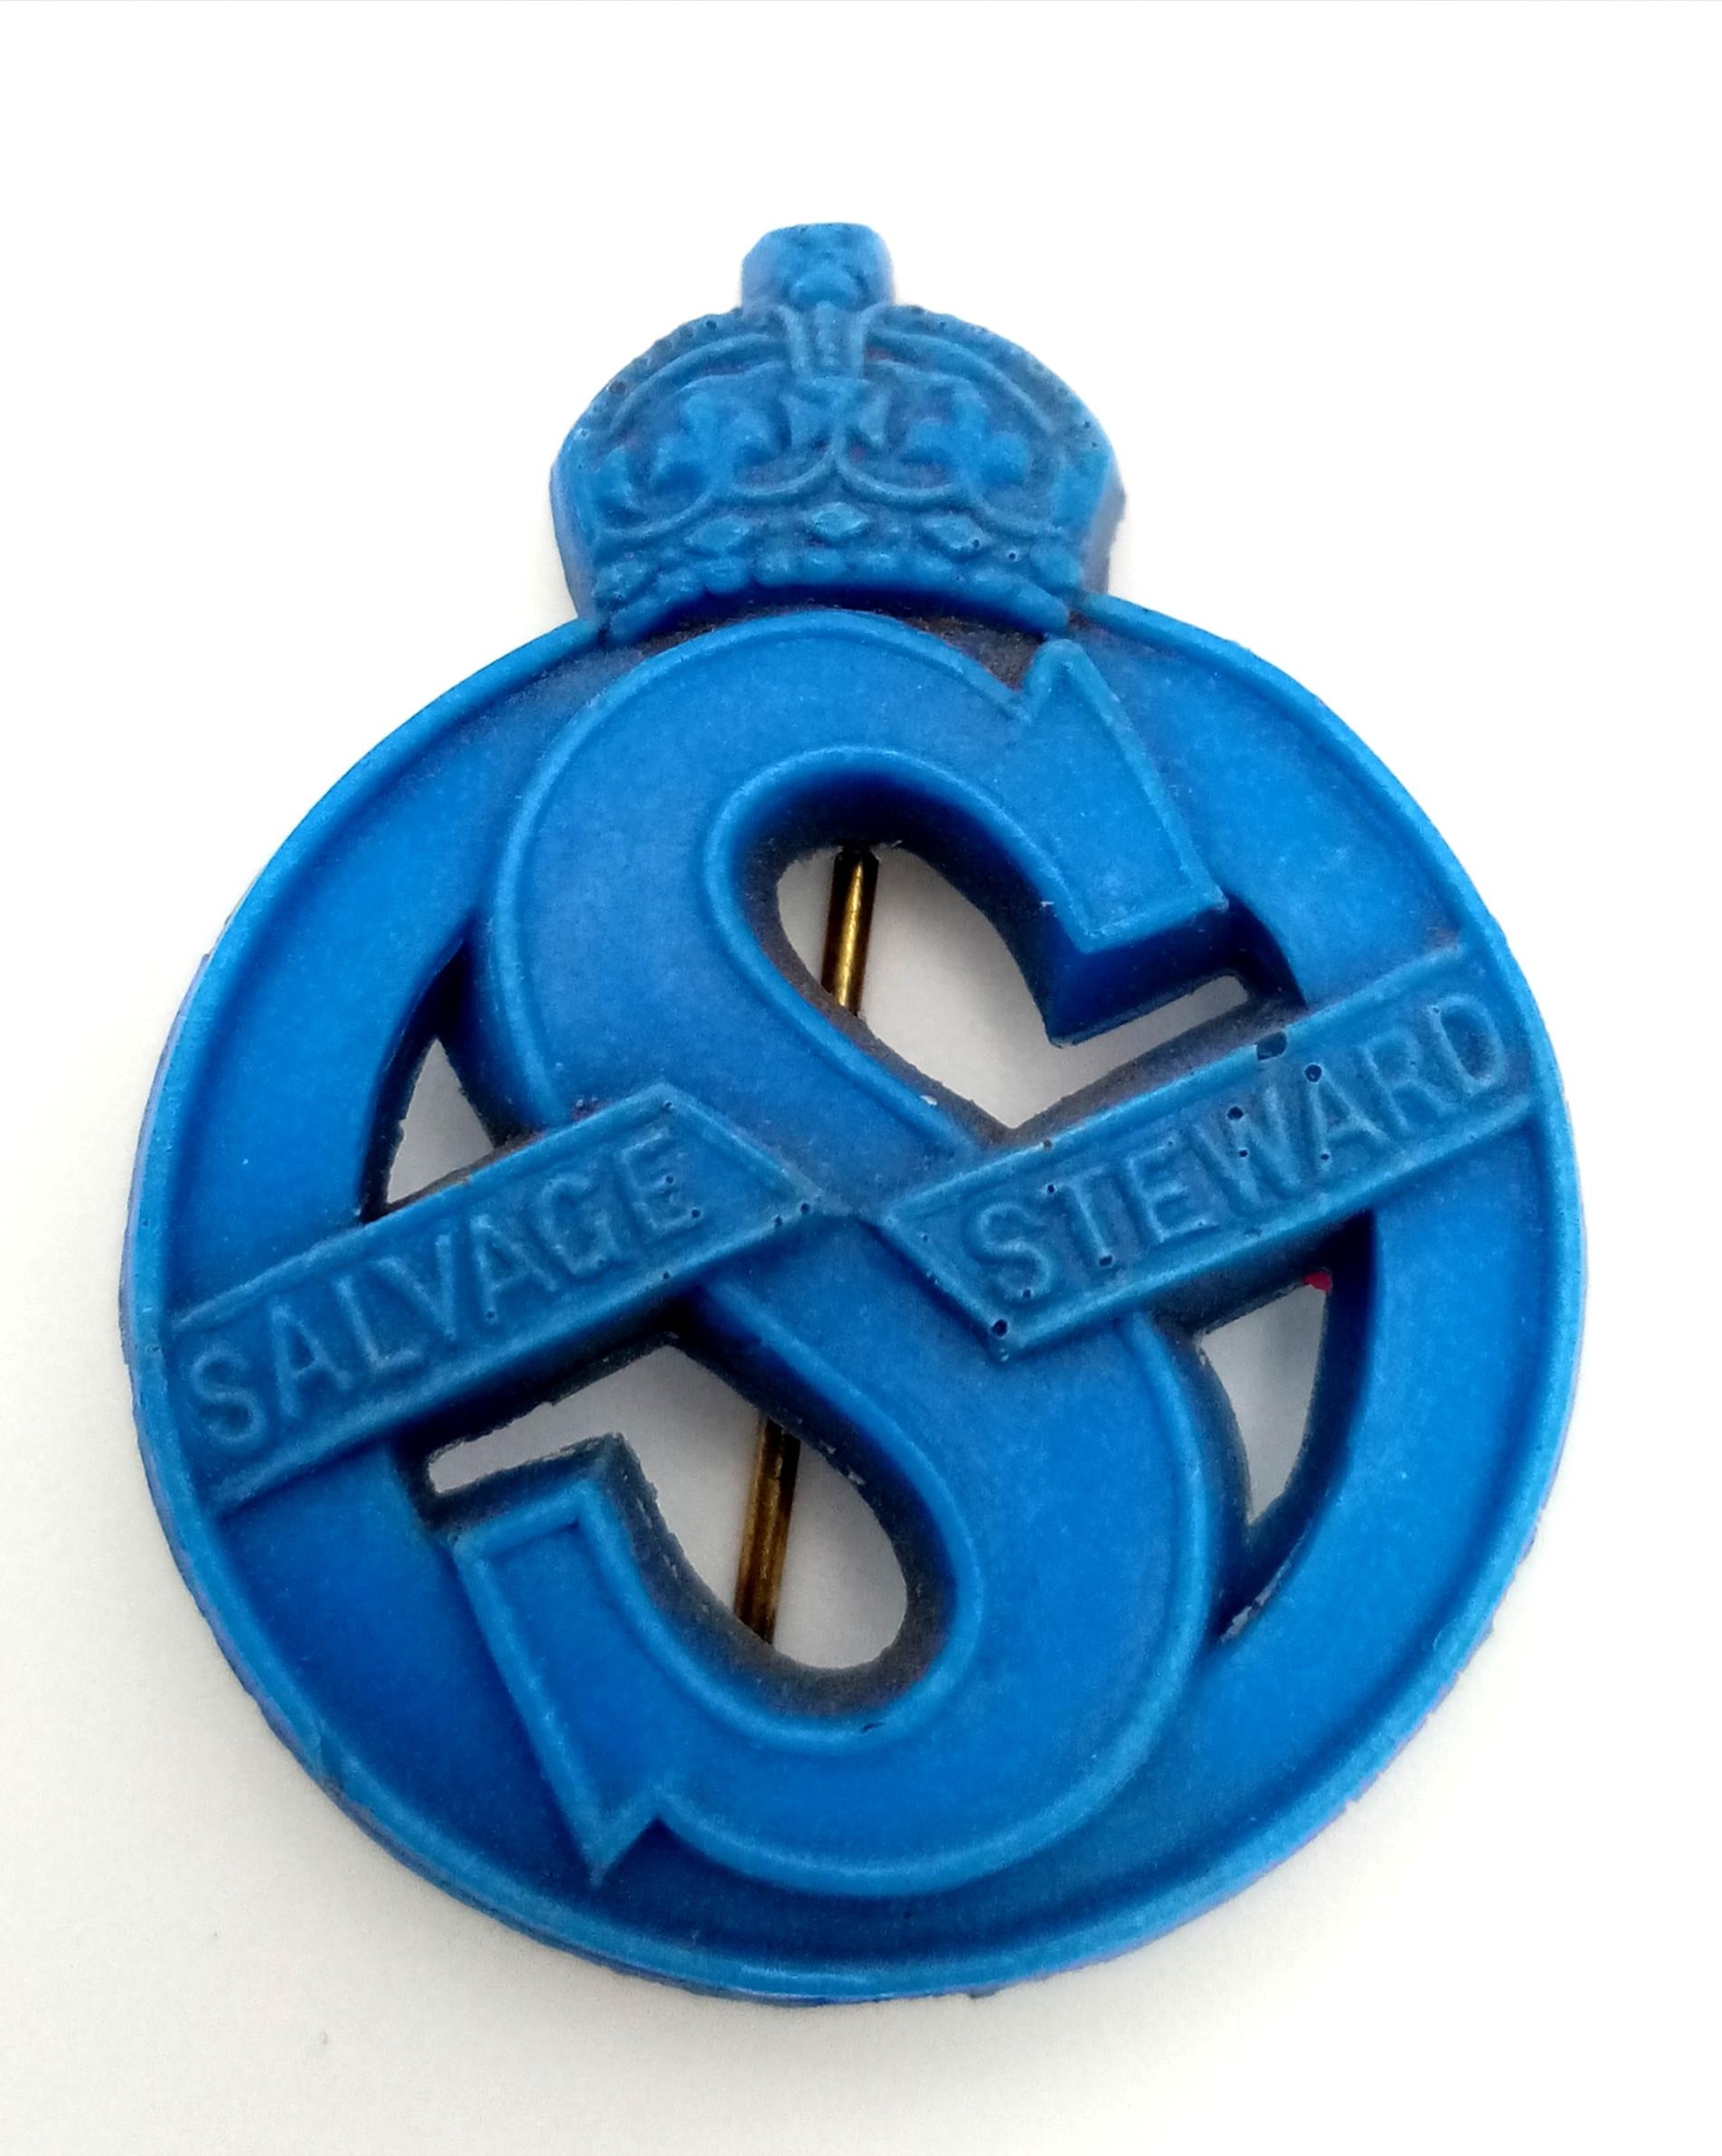 WW2 British Home Front Ministry of Supply, Salvage Steward in the rarer Blue Plastic (Cellulose